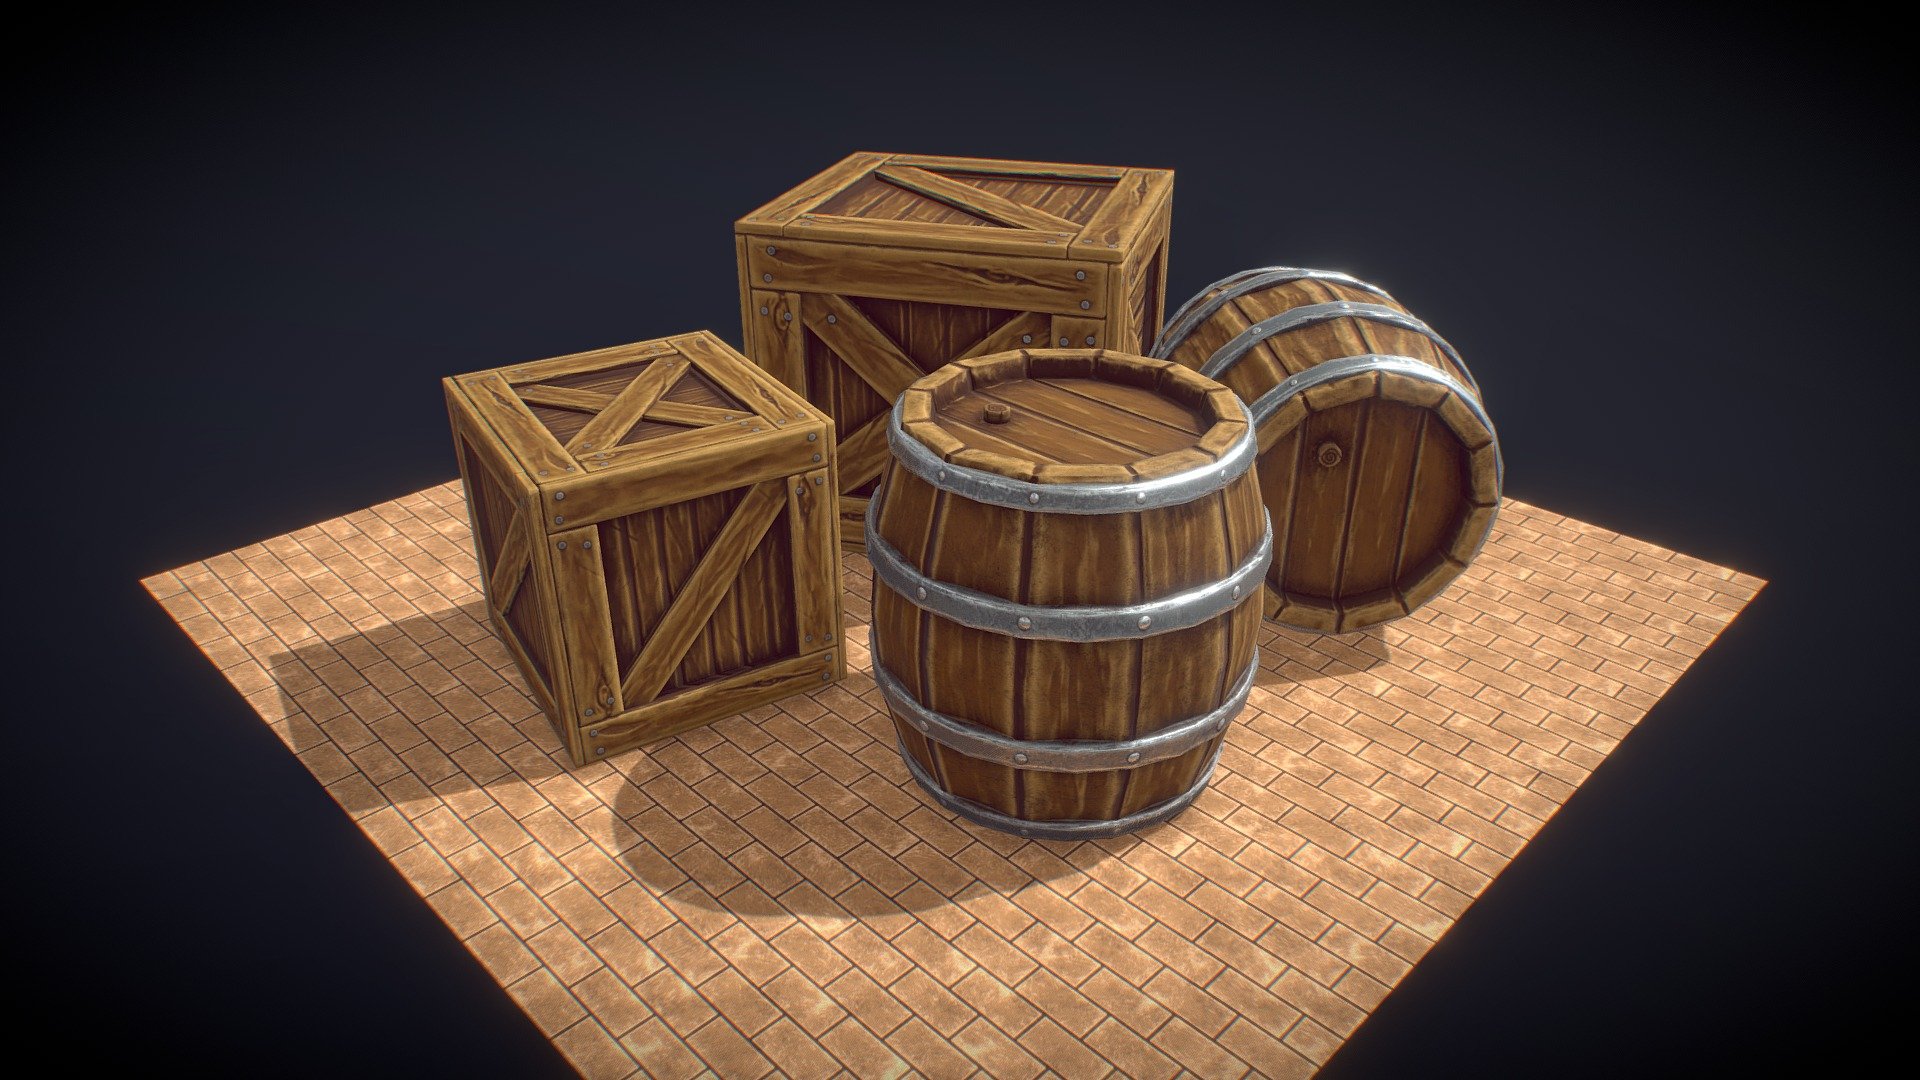 Lowpoly Wooden Boxes and Barrels with handpaint textures - Wooden Props Scene - 3D model by Sir Erdees (@sirerdees) 3d model